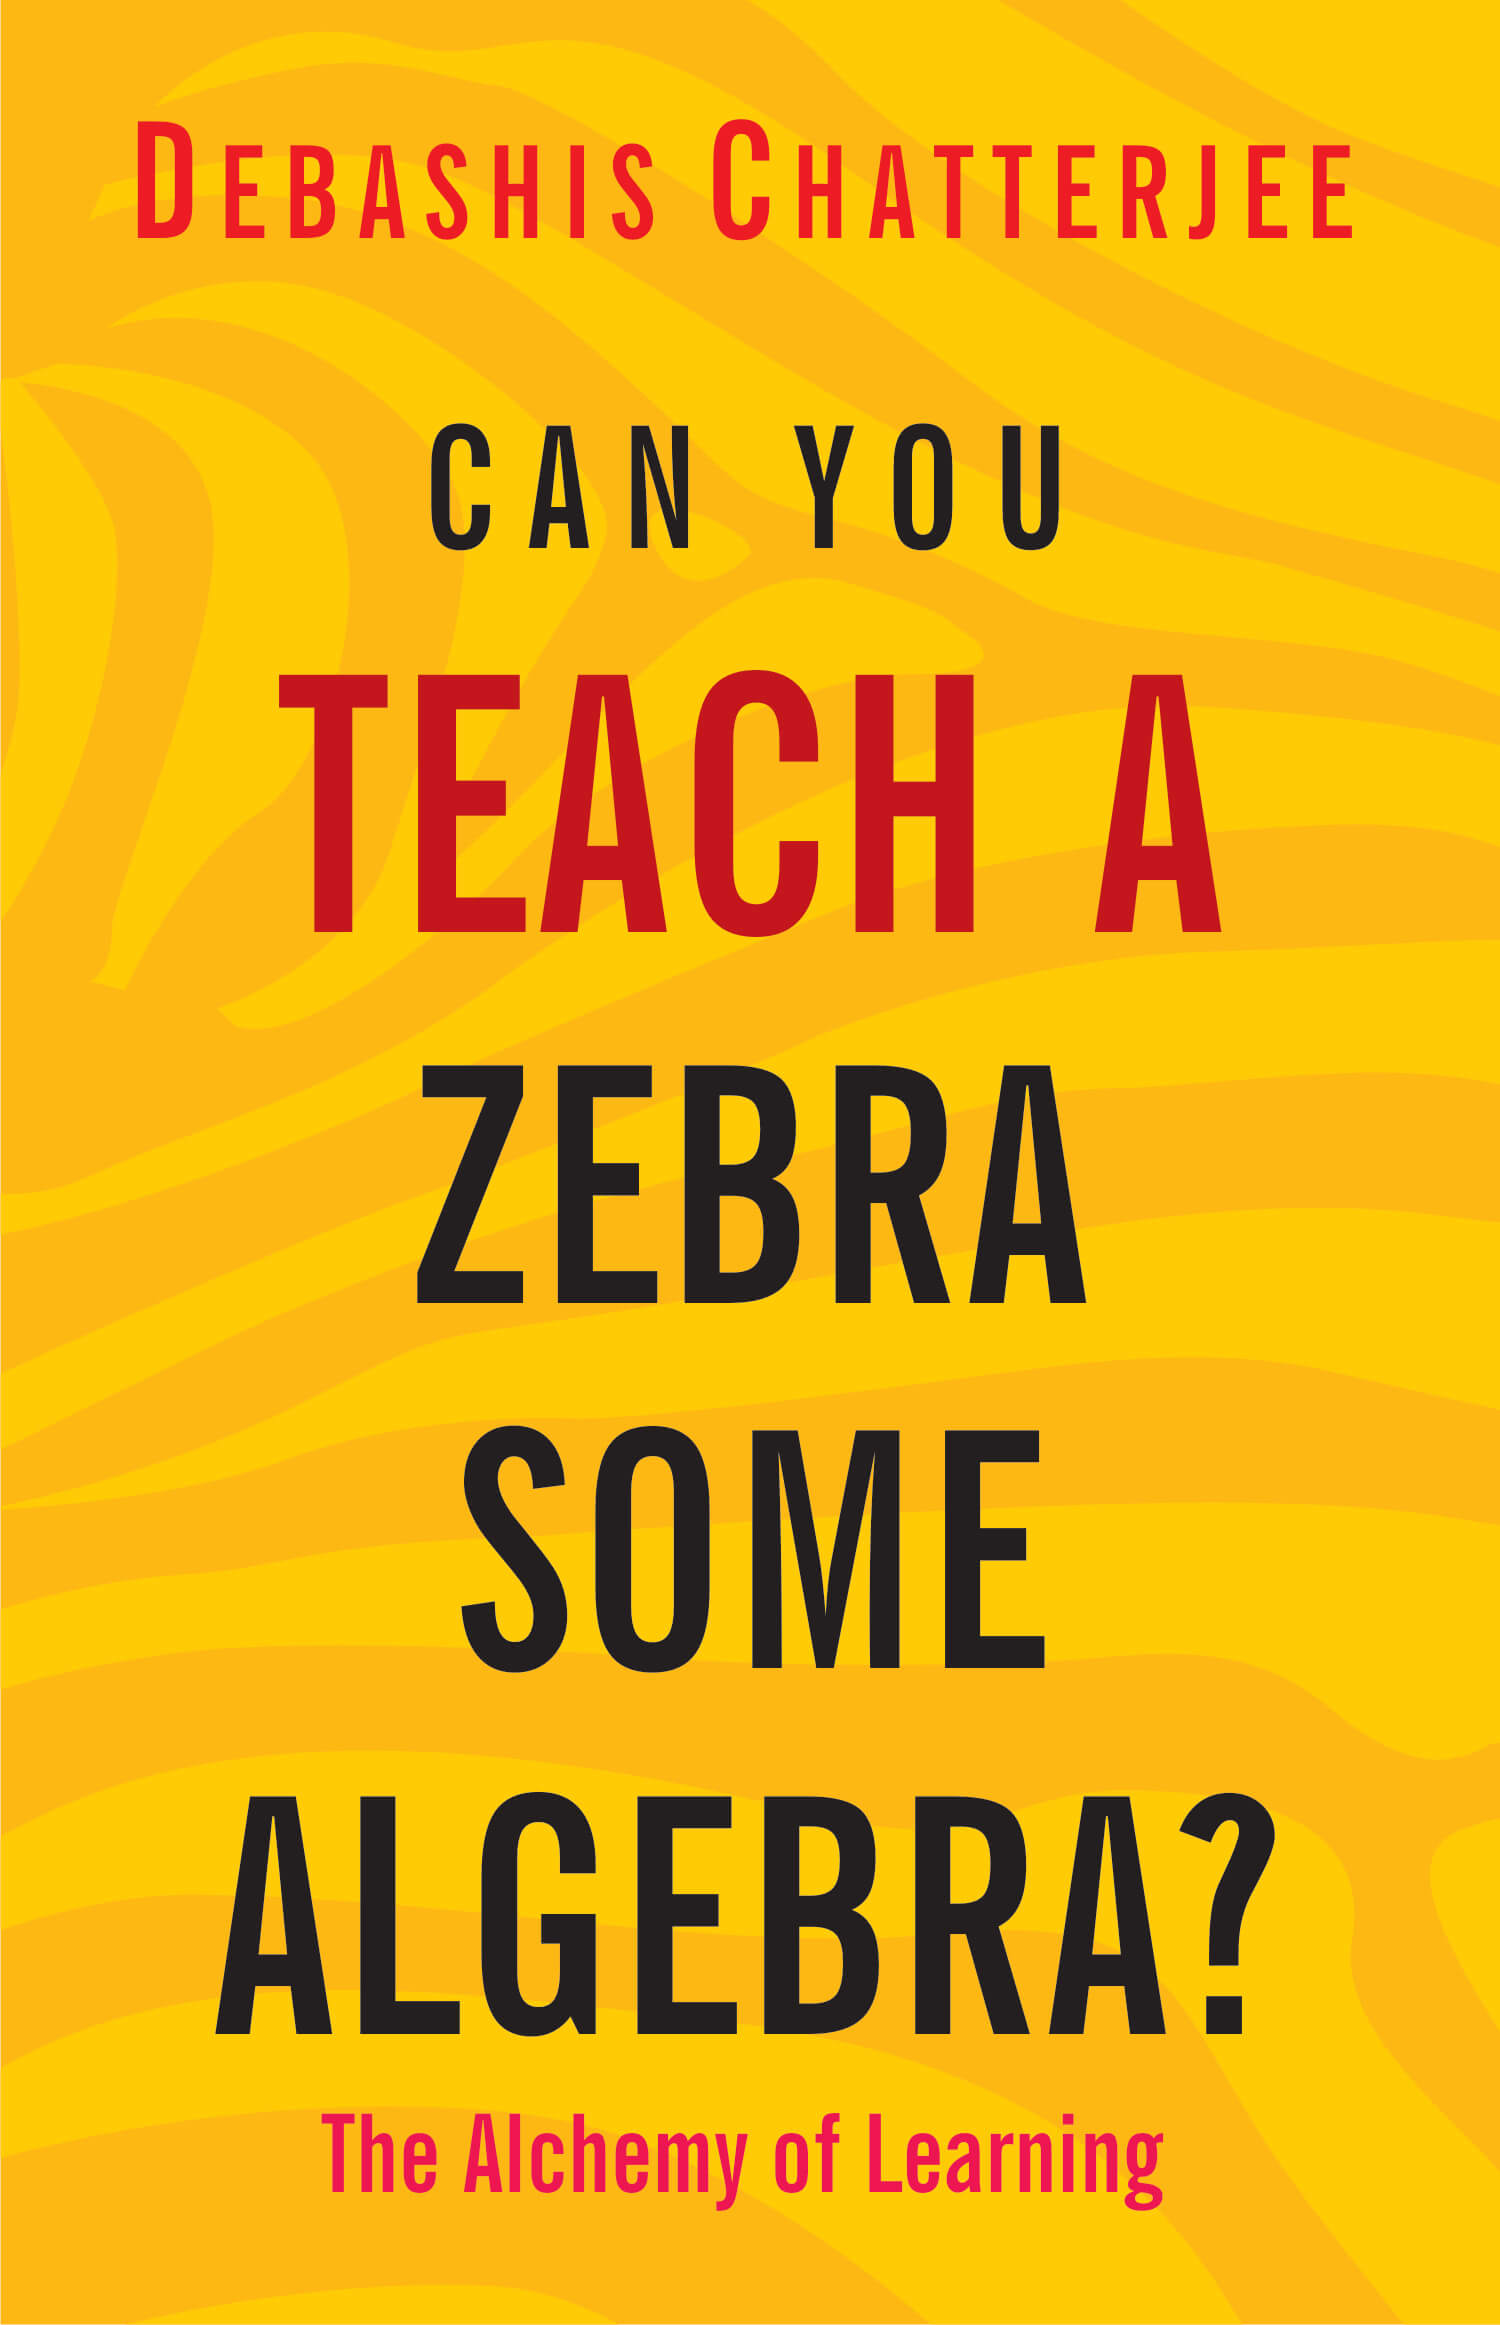 Can You Teach A Zebra Some Algebra?: The Alchemy Of Learning